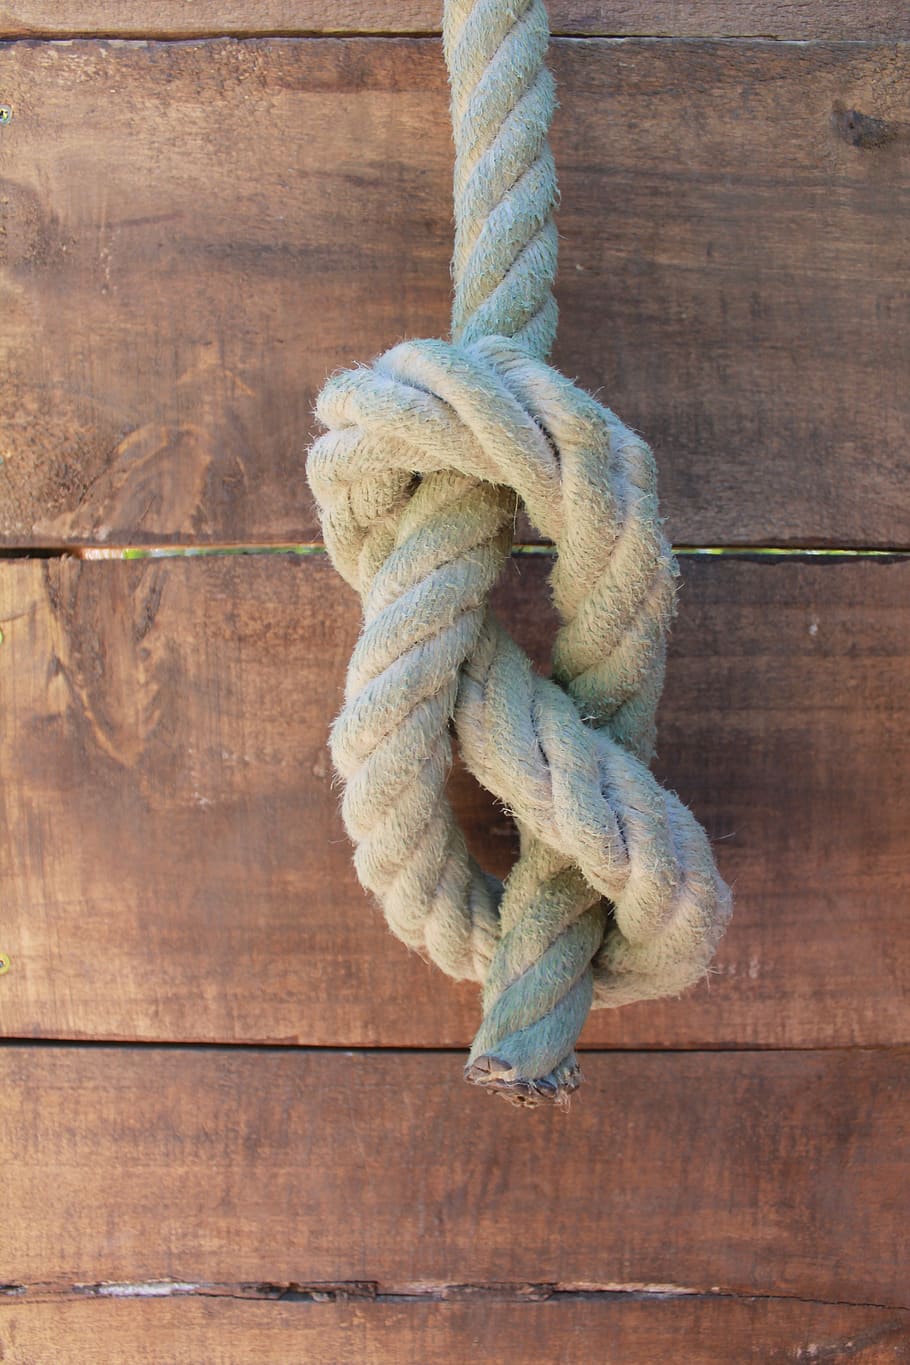 knot, node 8, rope, wood, wood - material, tied up, strength, tied knot, close-up, day